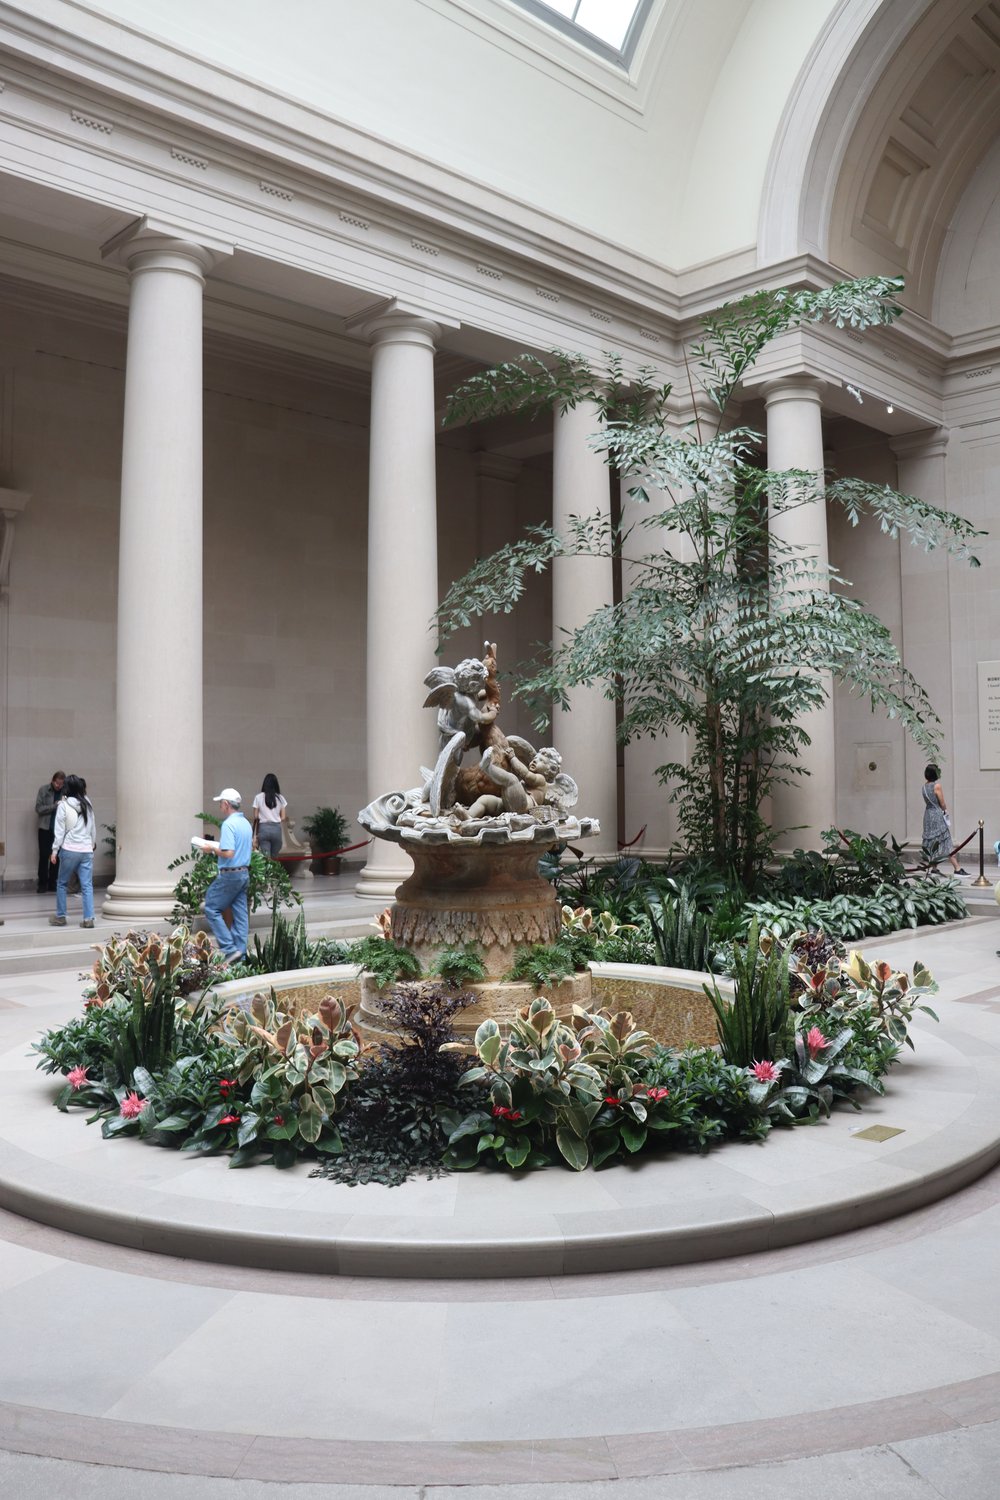 Beautiful fountains and gardens in the rotundas.